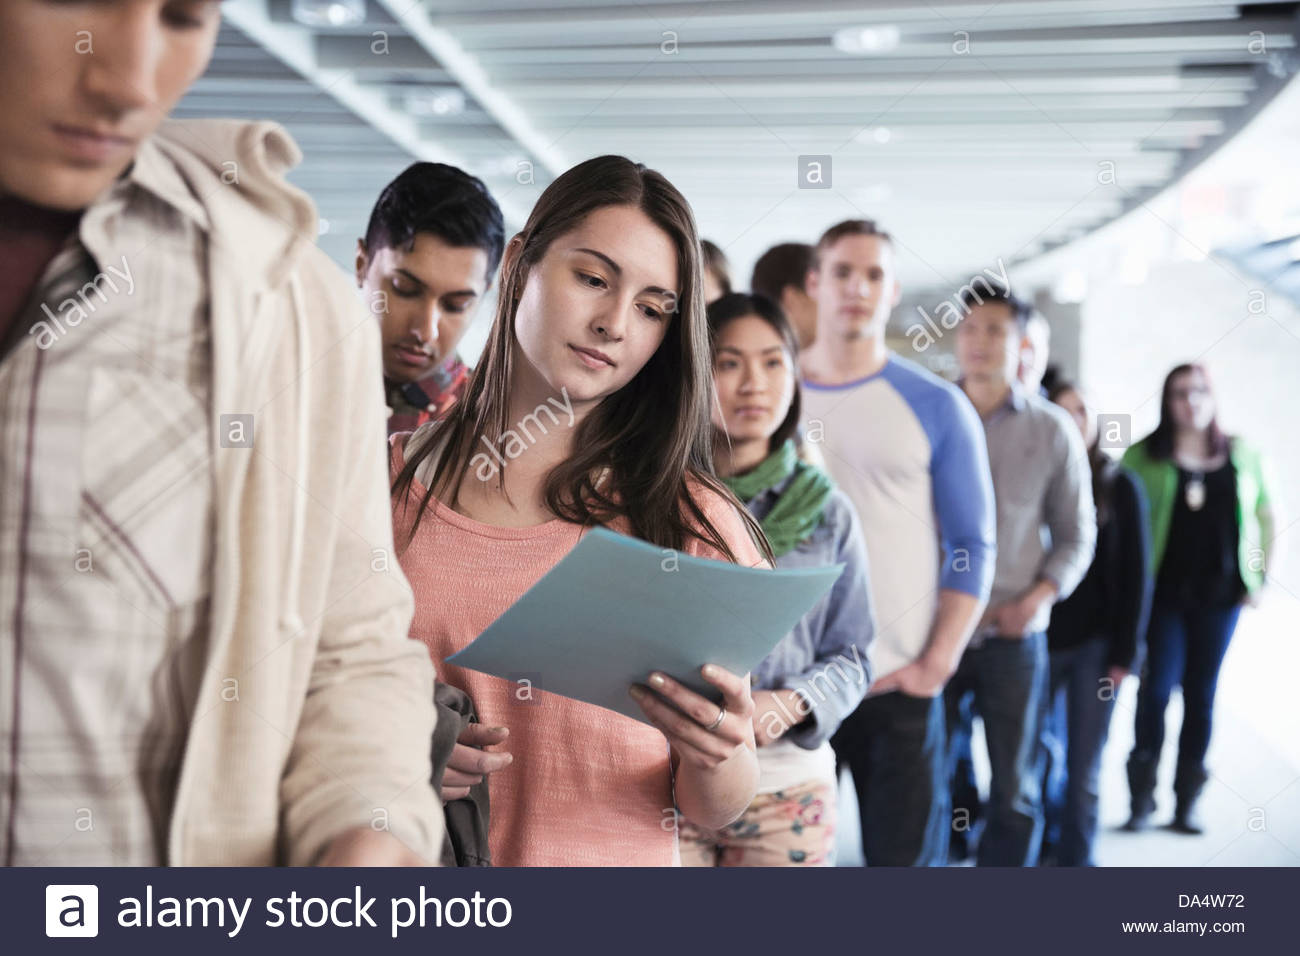 Large group of students standing in line at college campus Stock Photo